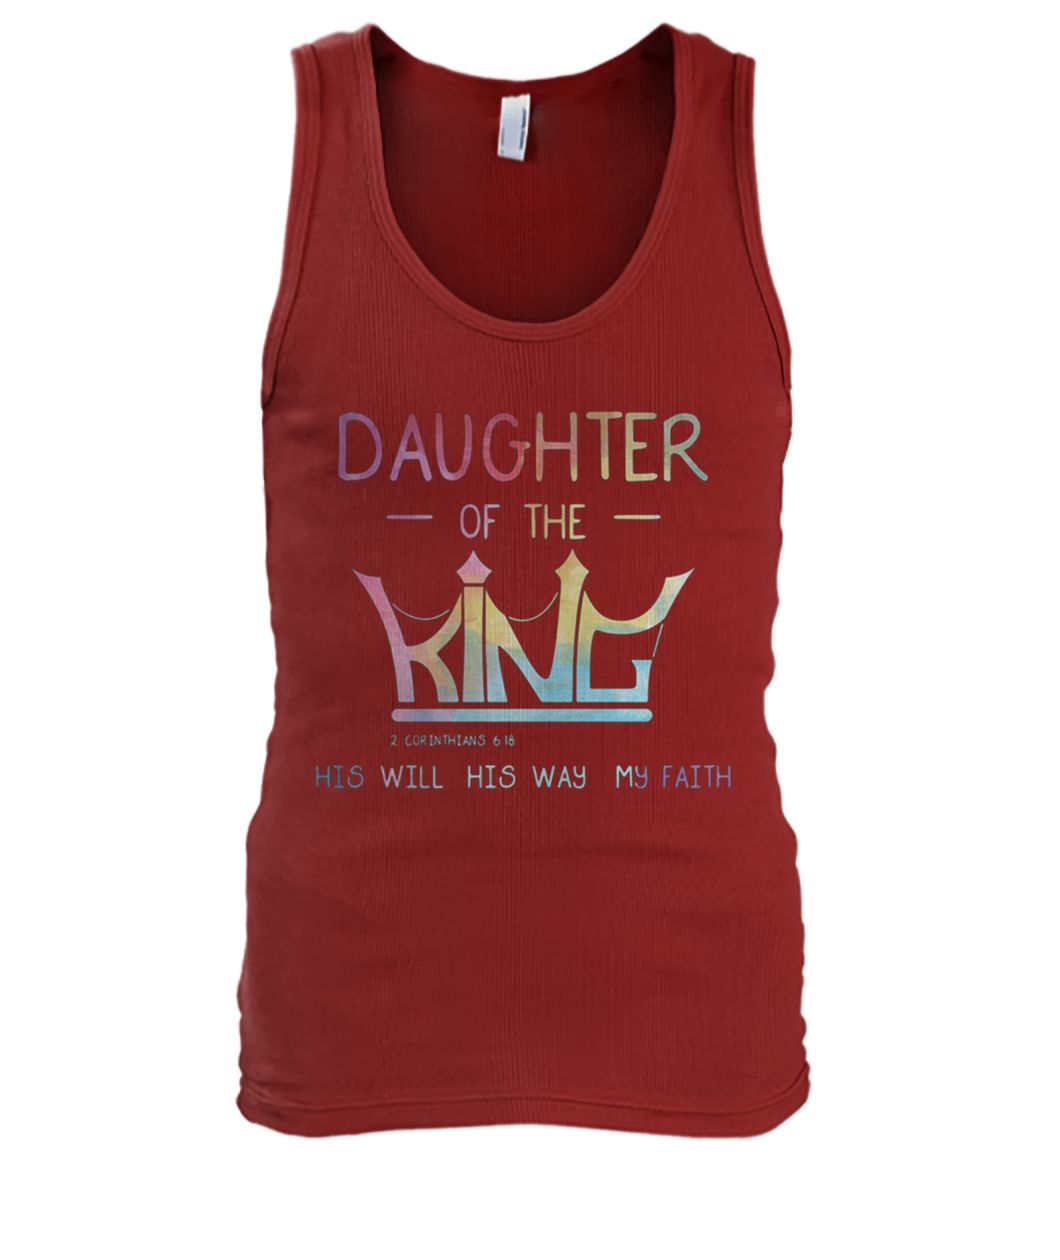 Daughter of the king 2 corinthians 6 18 his will his way my faith men's tank top